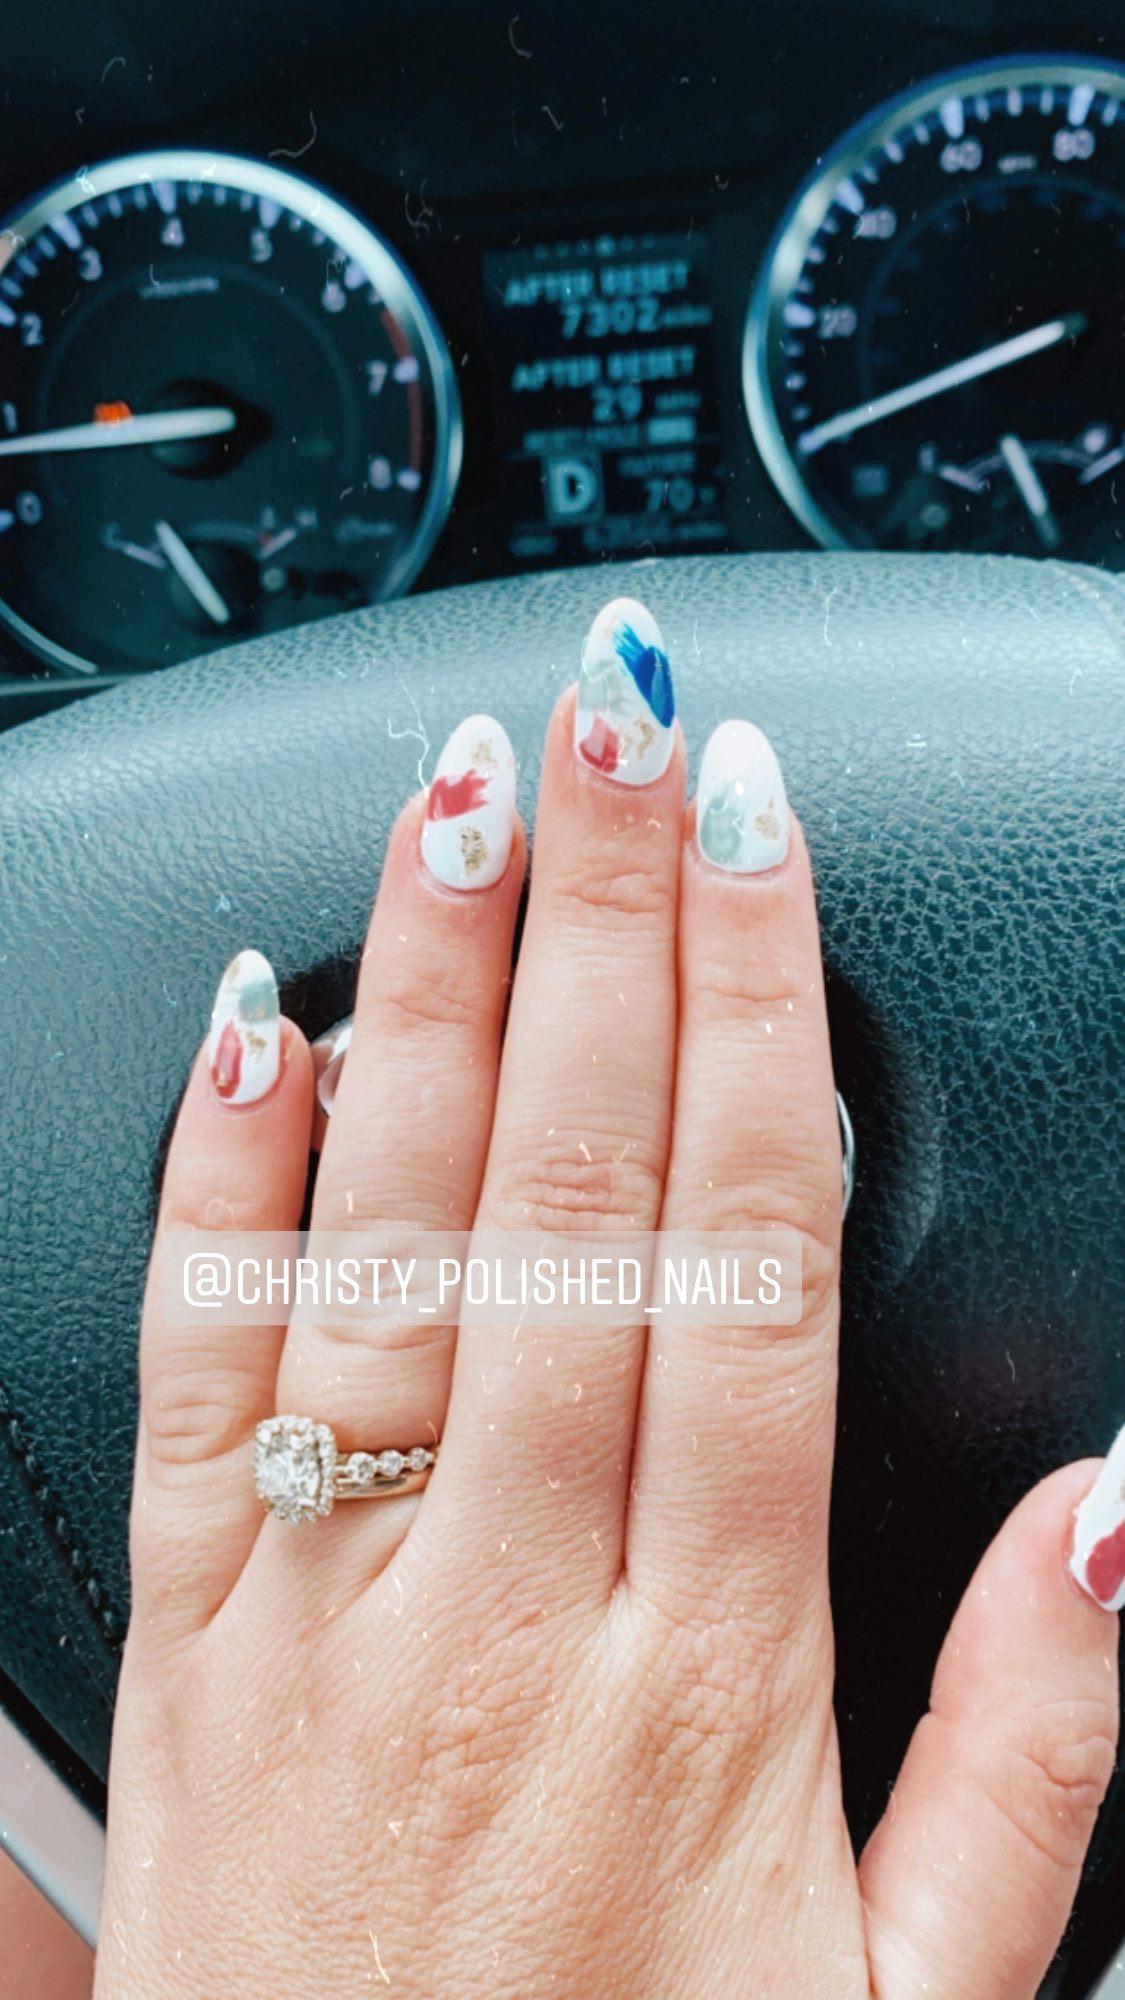 Oklahoma Best Nail Salons: Discover the Best Nail Salons in Oklahoma